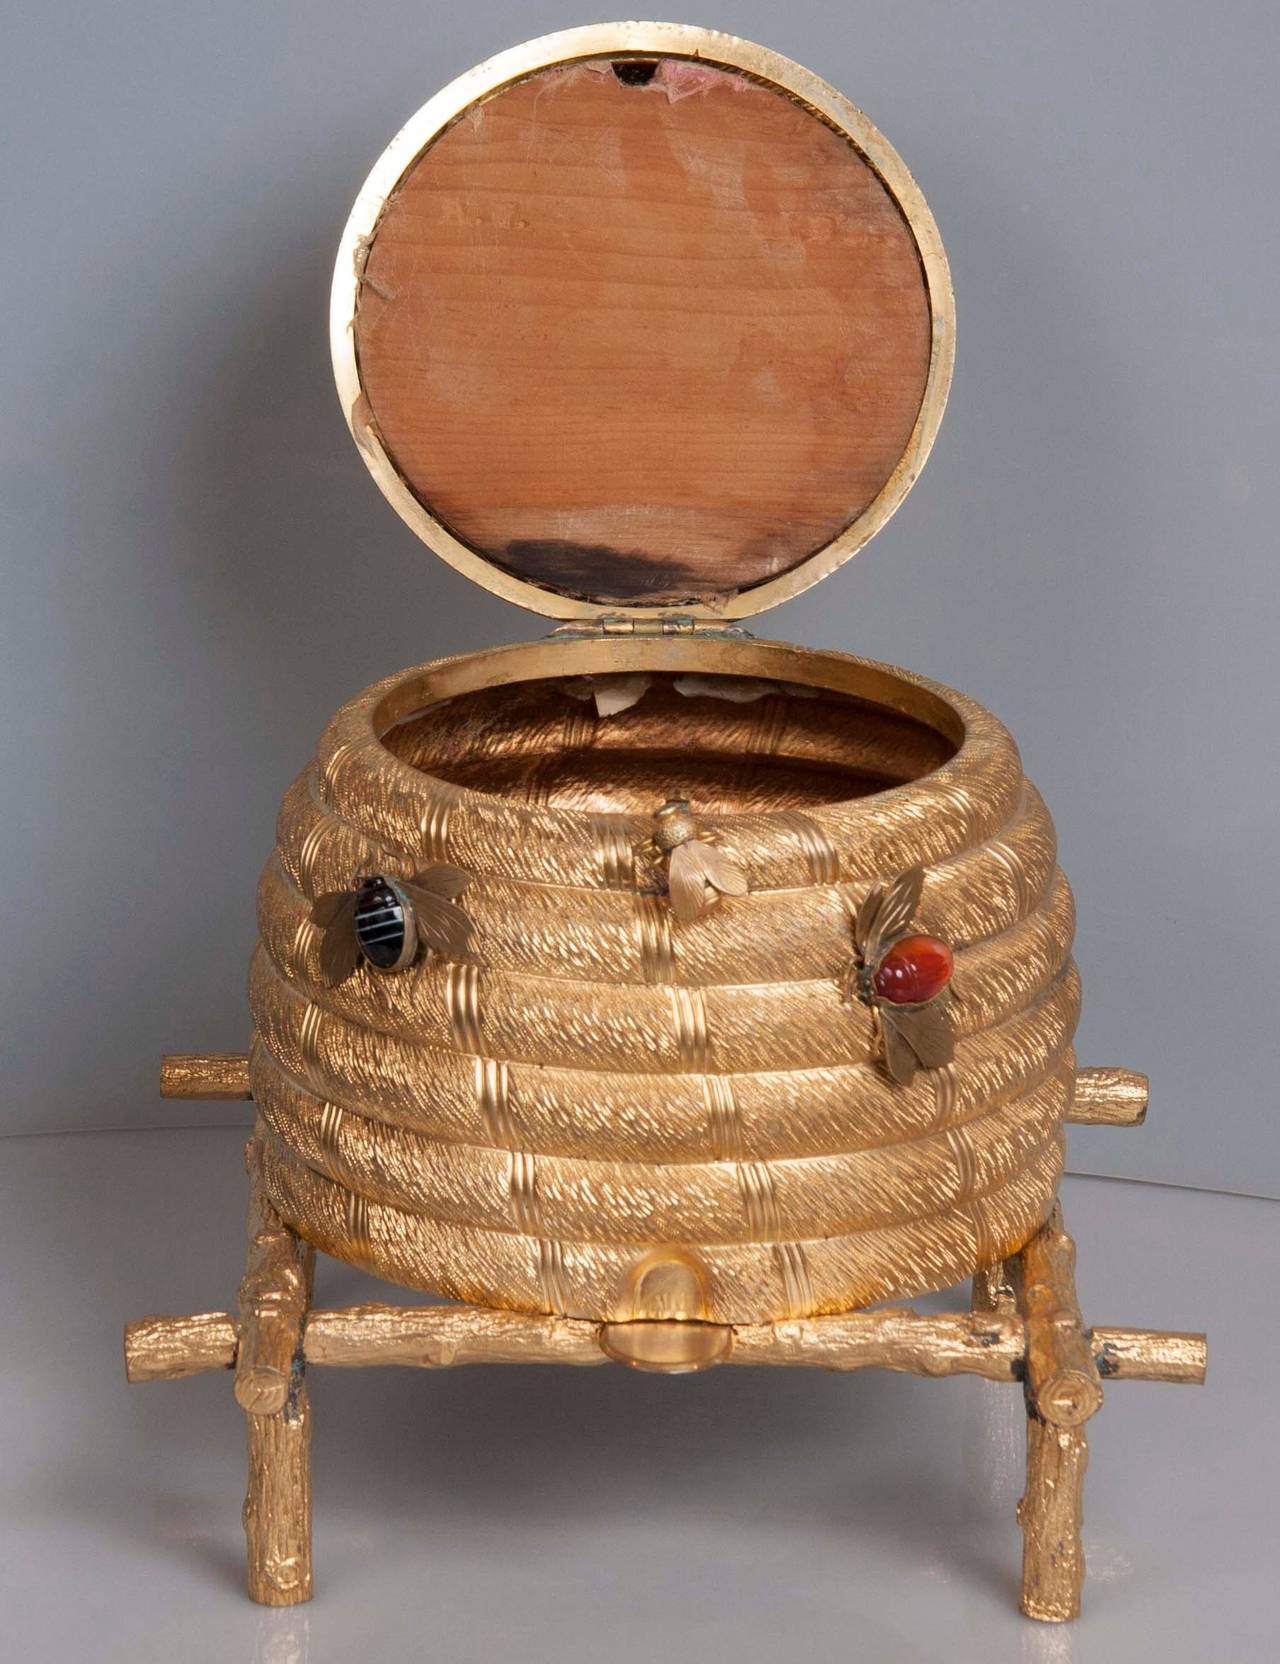 A late 19th-early 20th century English gilt metal work box in the form of a beehive.